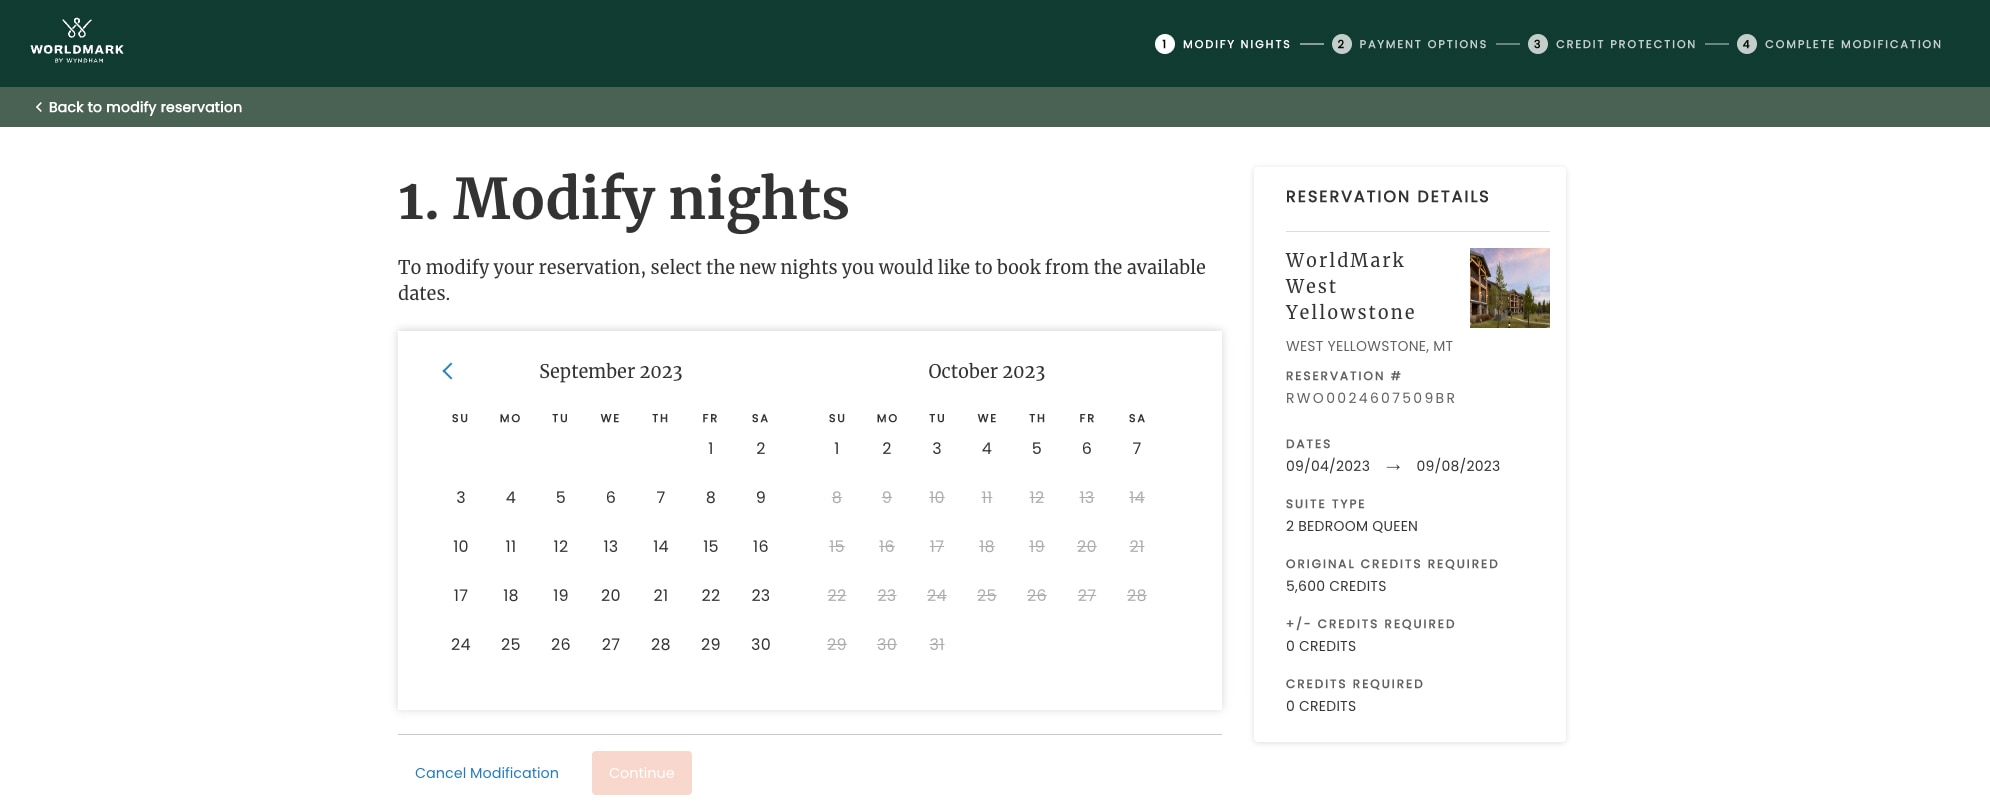 View of Modify nights monthly calendar search function on WorldMark owner website